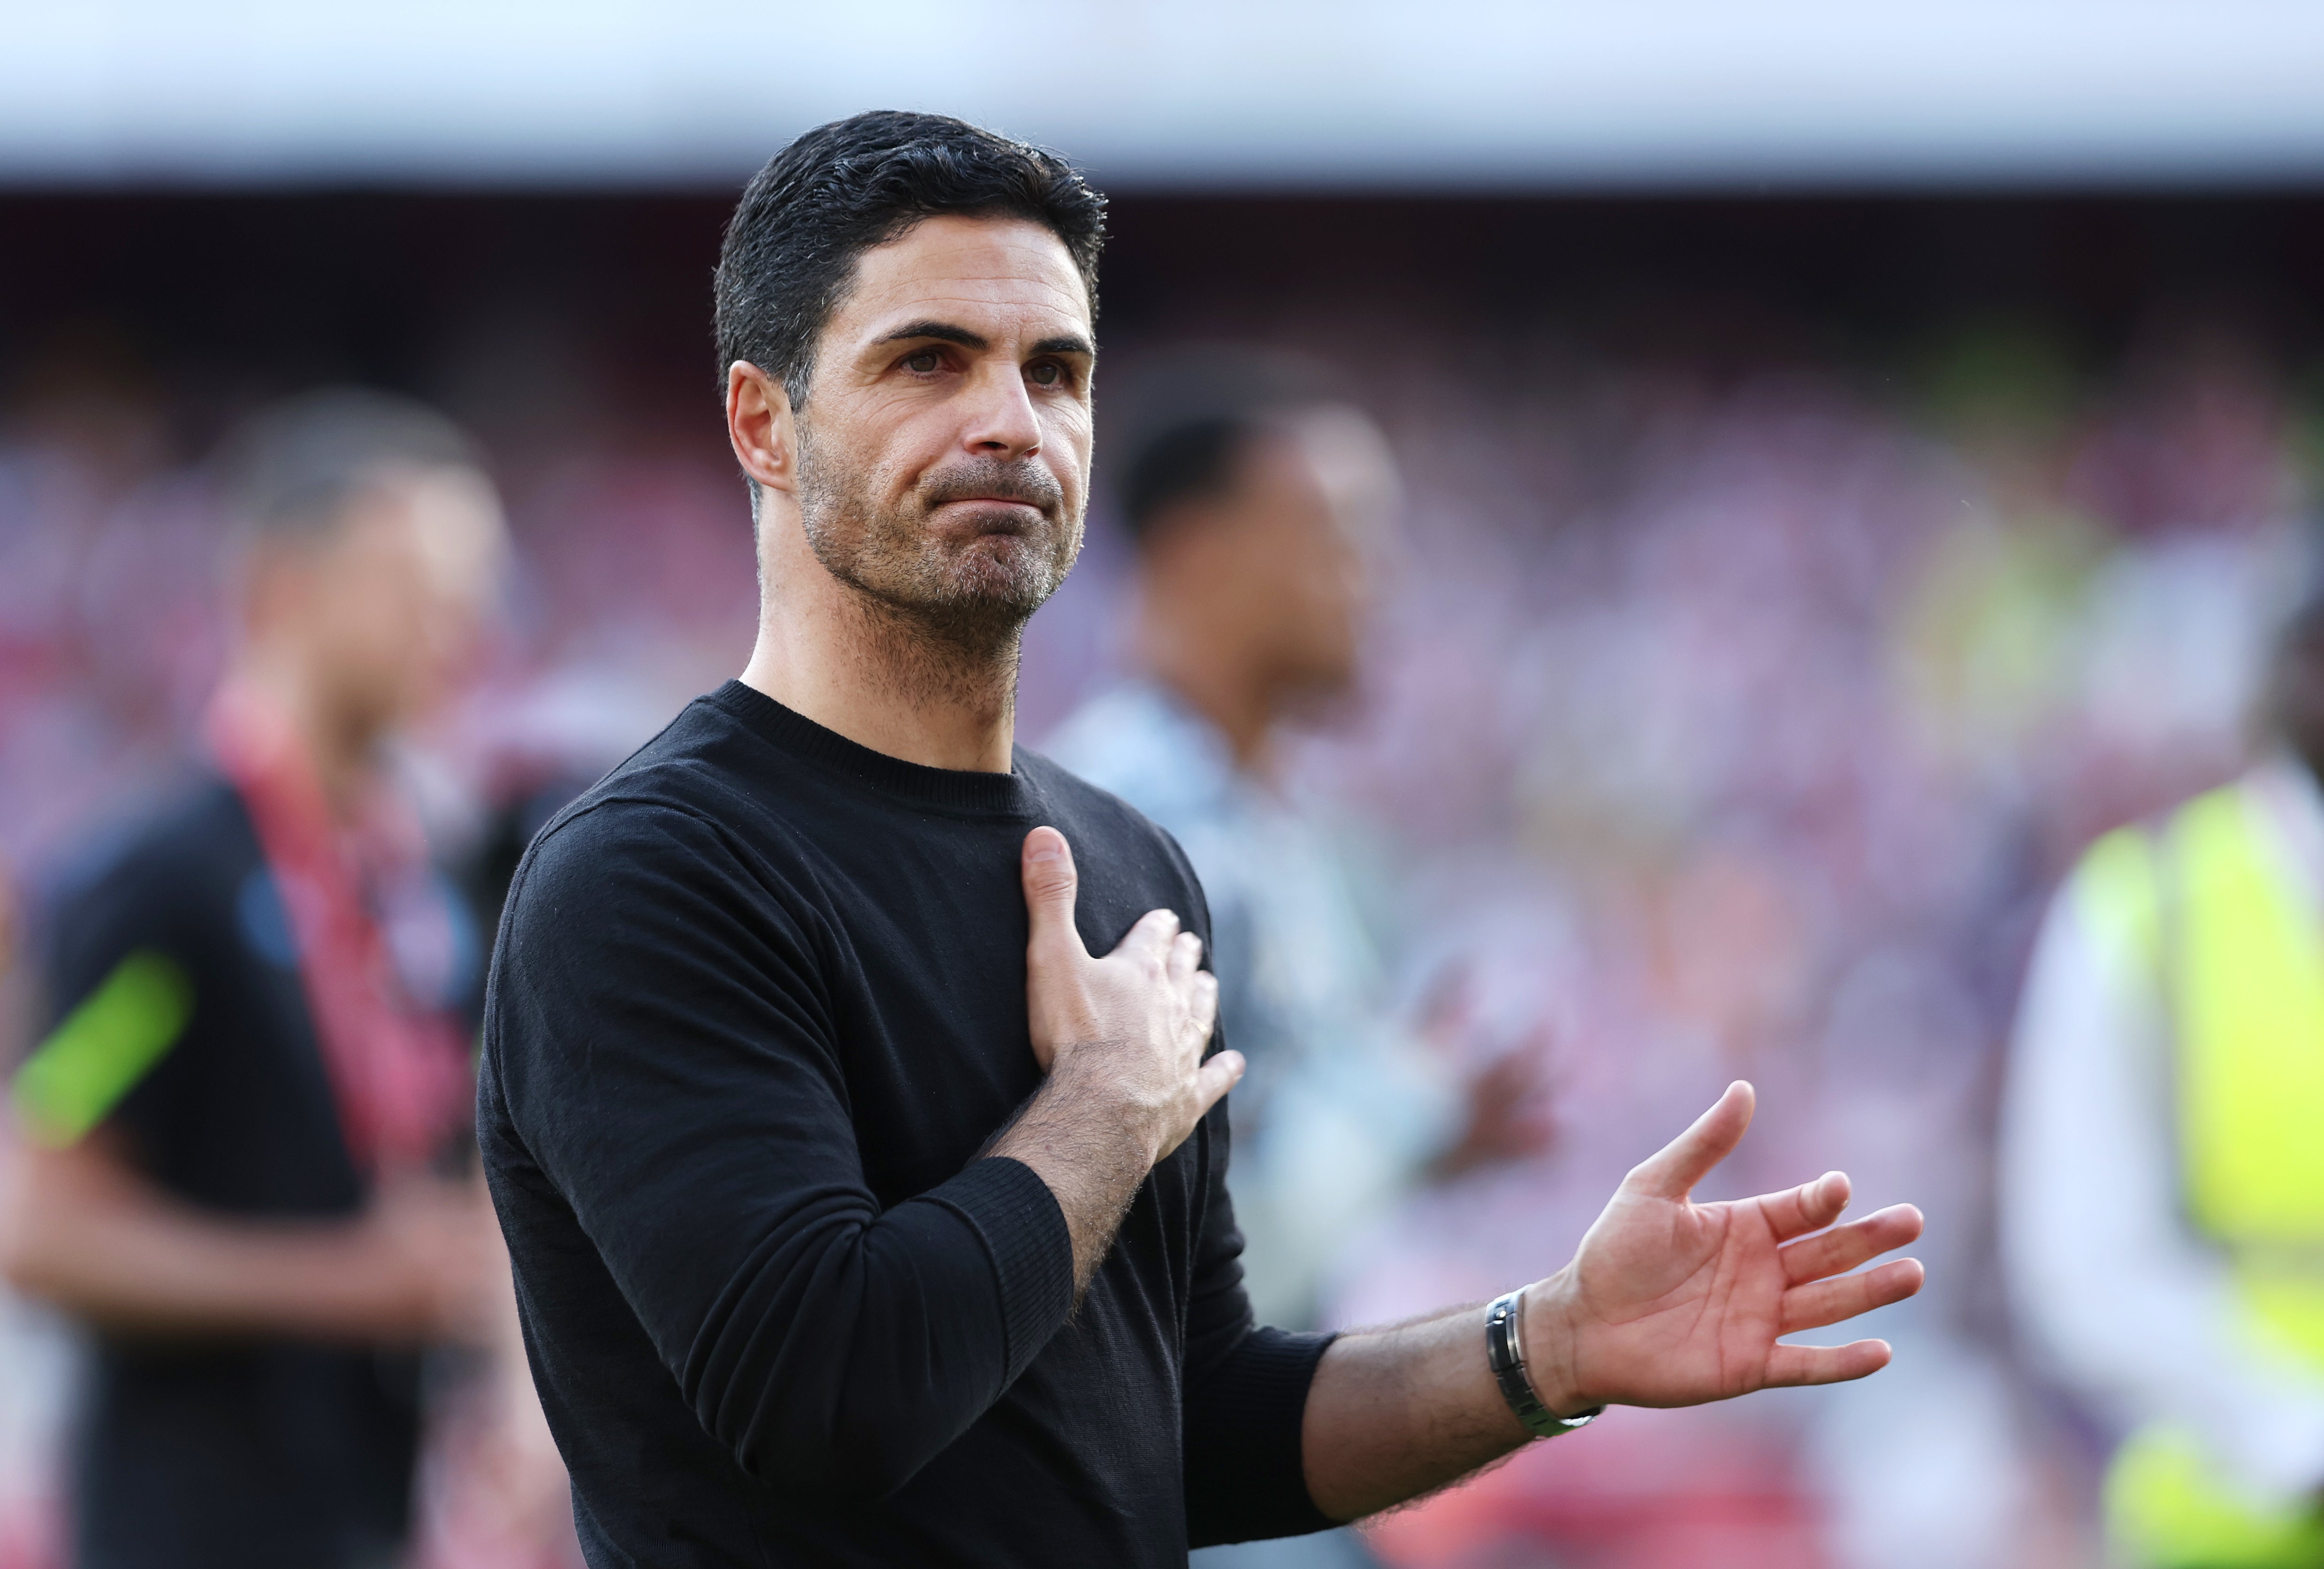 Mikel Arteta’s Arsenal set a club record for most wins in a Premier League season, but fell short of the title